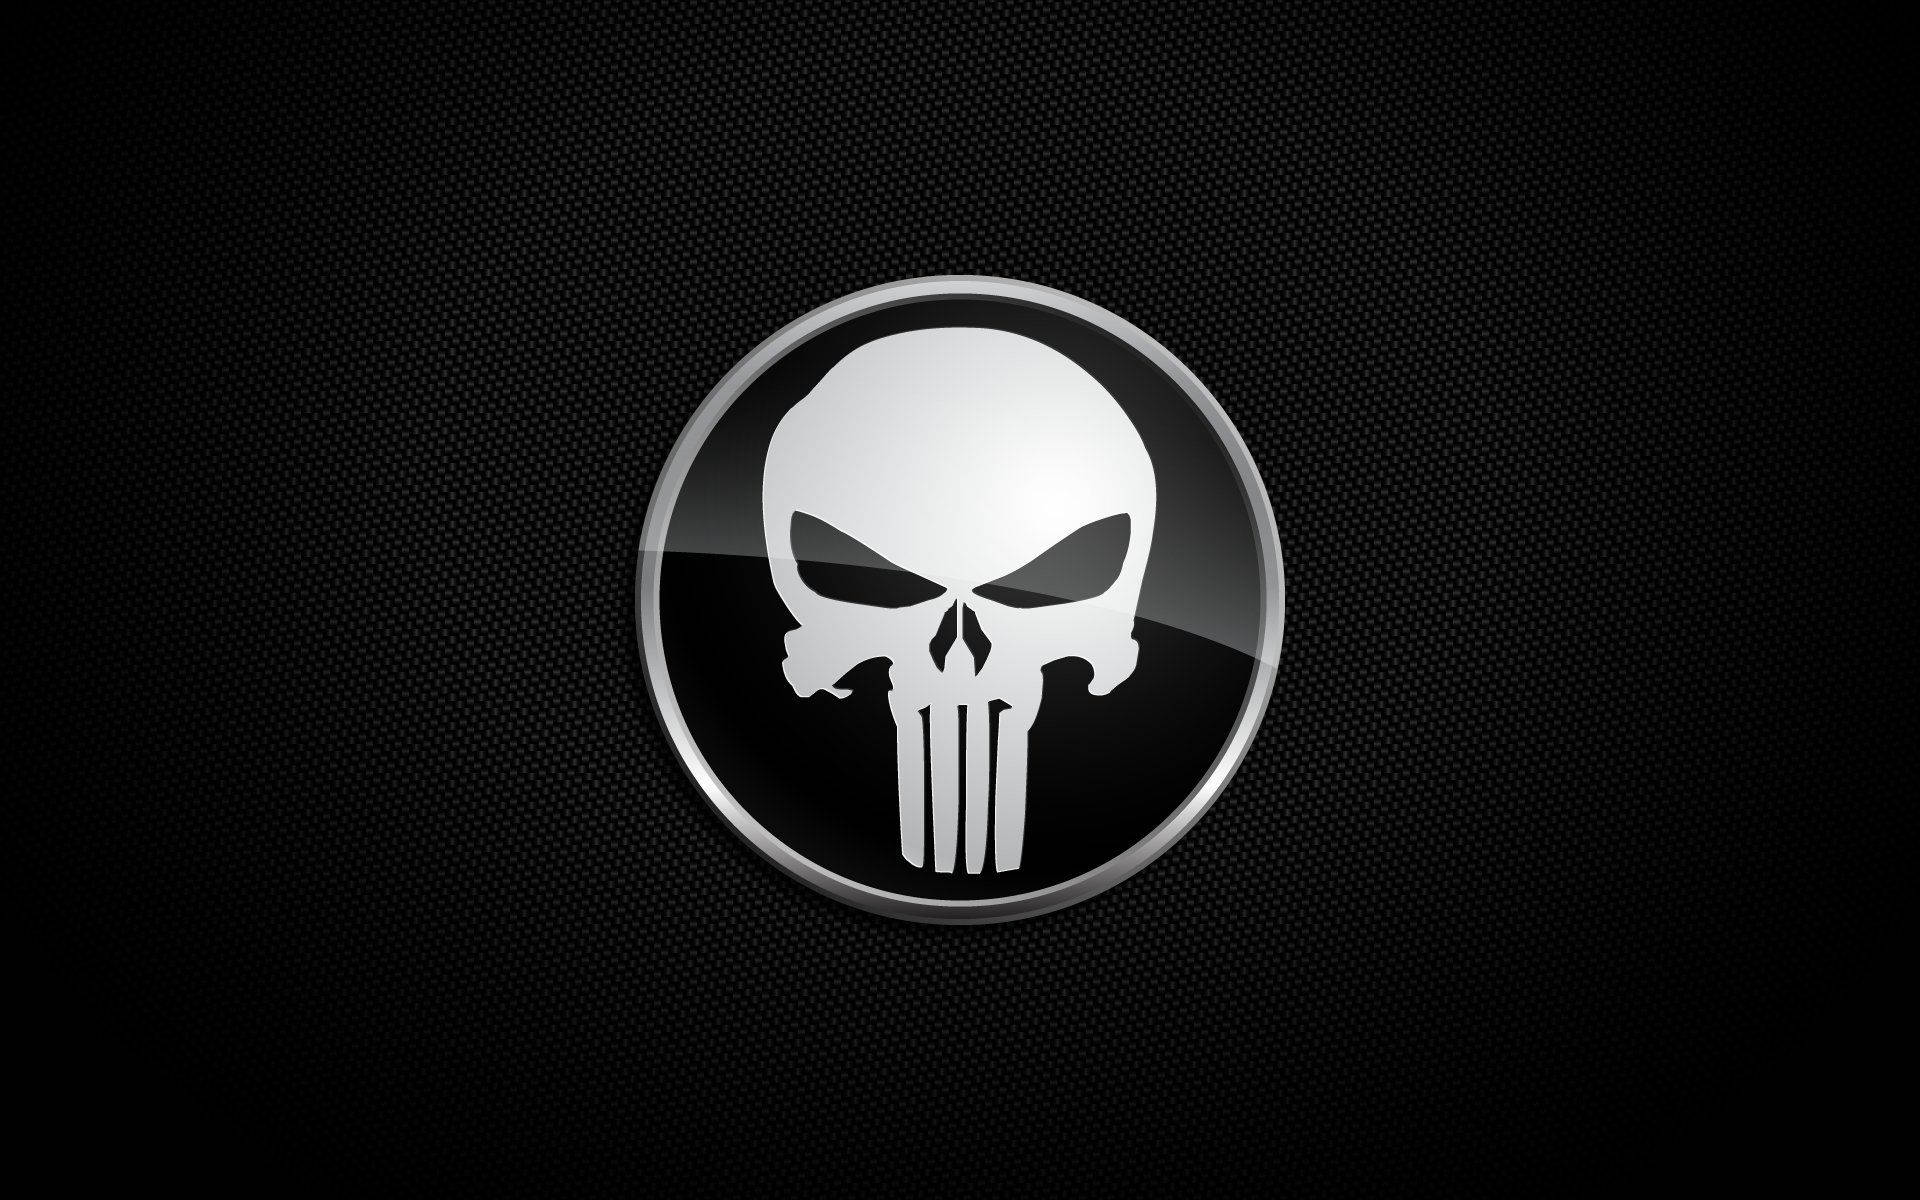 "Justice comes with a vengeance - Punisher" Wallpaper